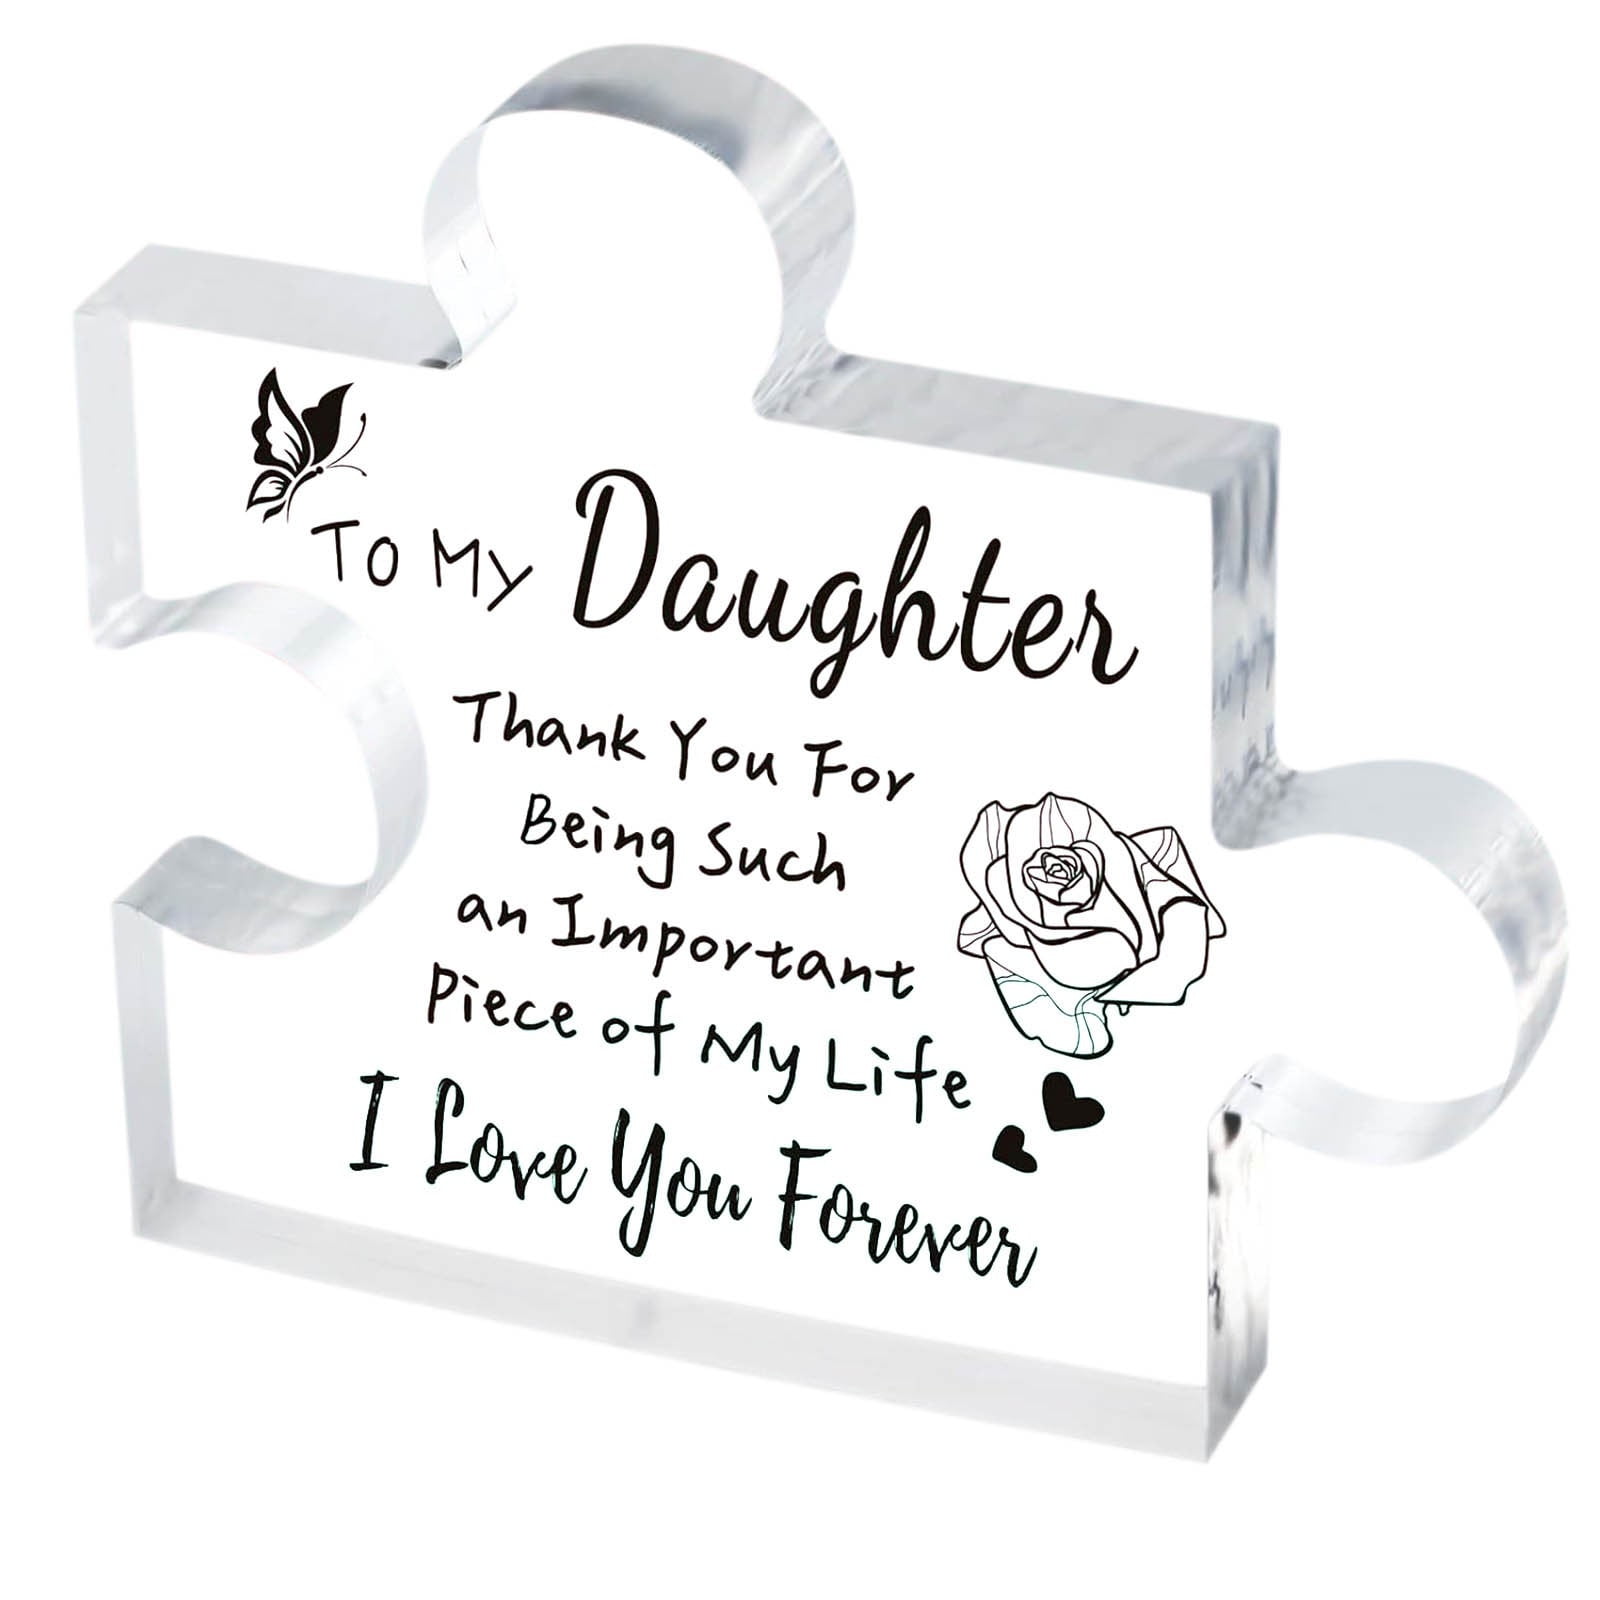 Gifts for Mom from Daughter Son - Engraved Acrylic Block Puzzle